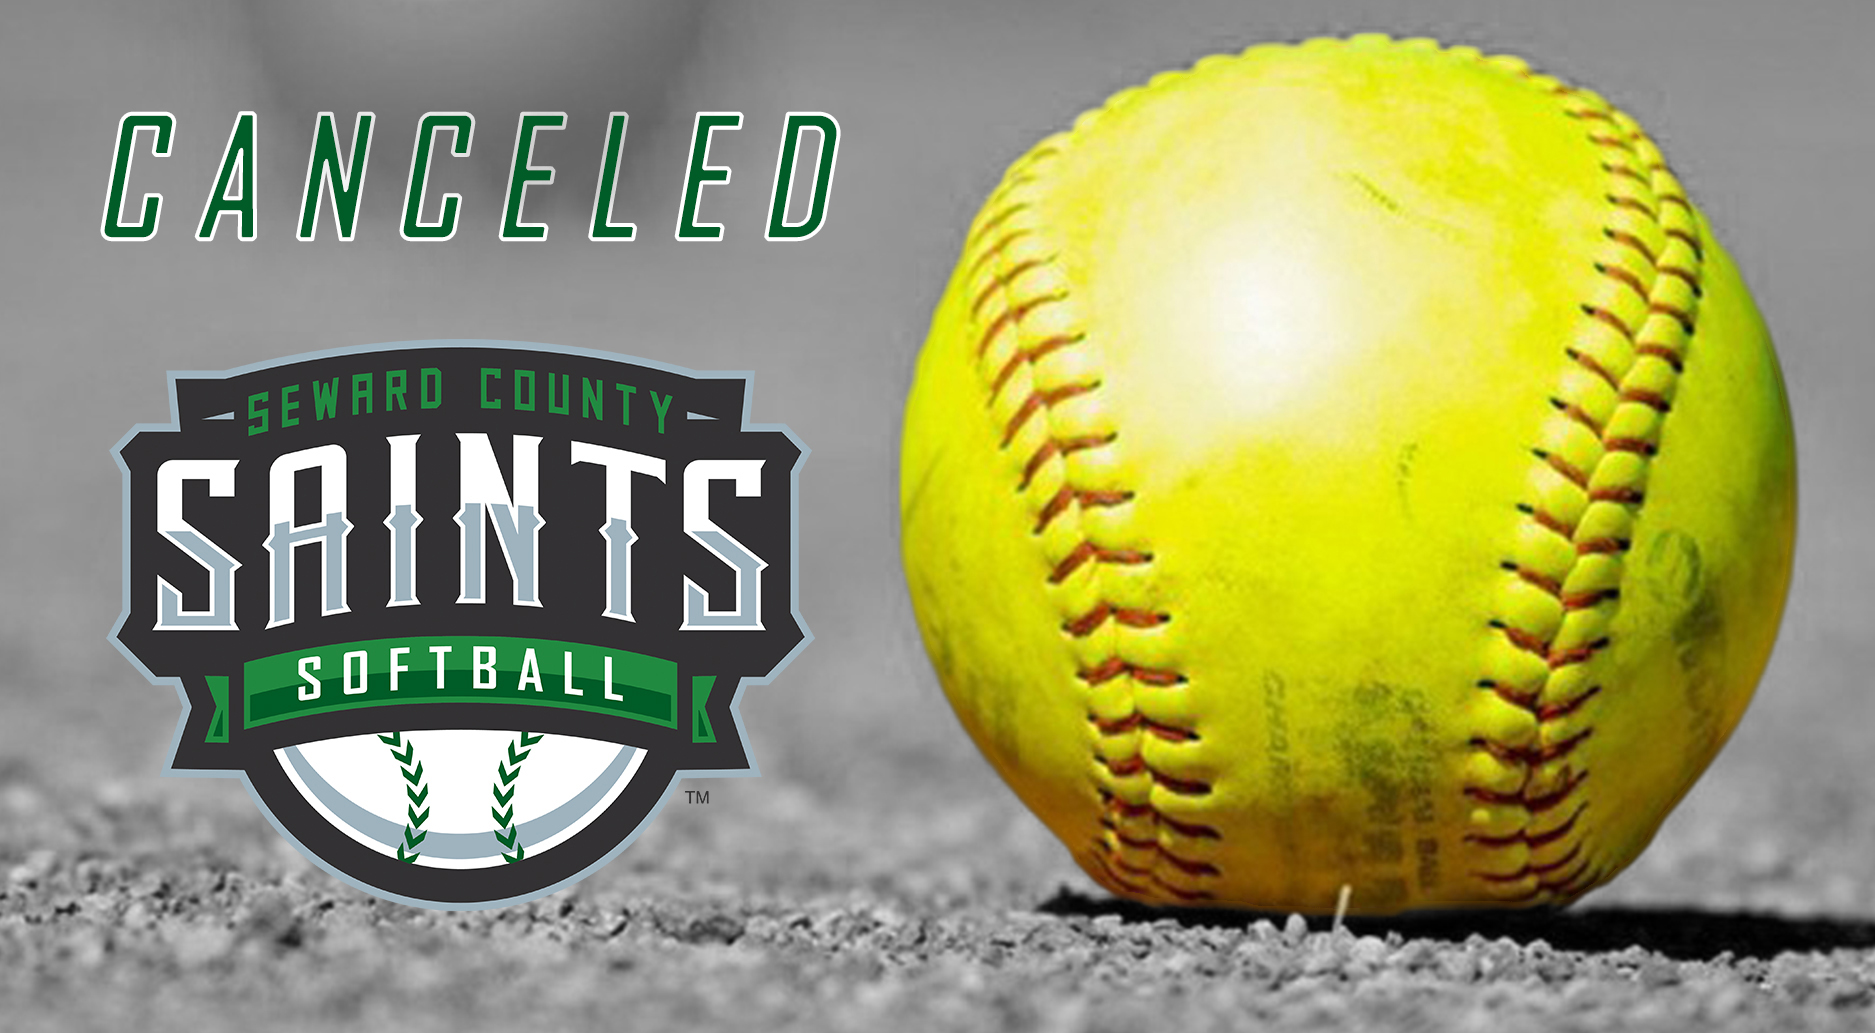 Tuesday's Softball games canceled in Clarendon